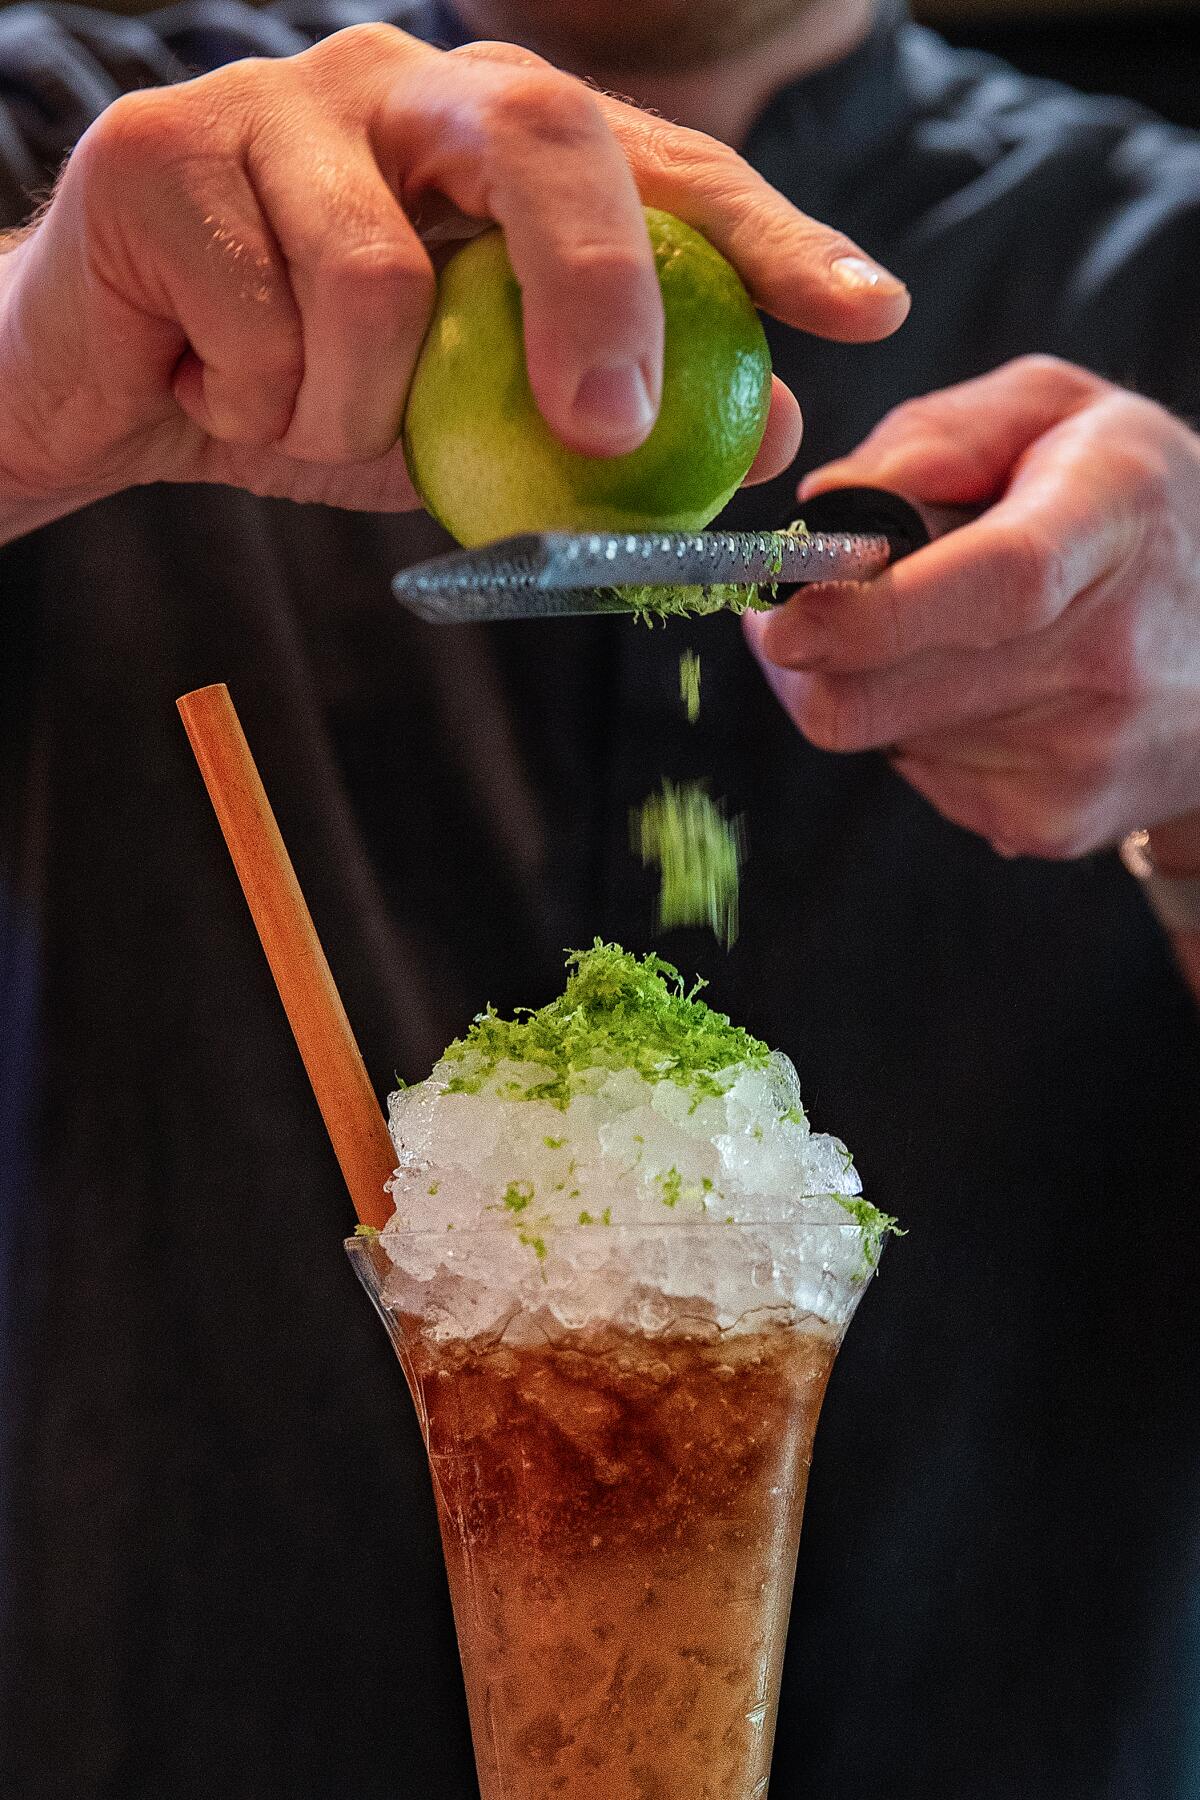 Austin Hennelly adds grated lime to an Amazake Swizzle.